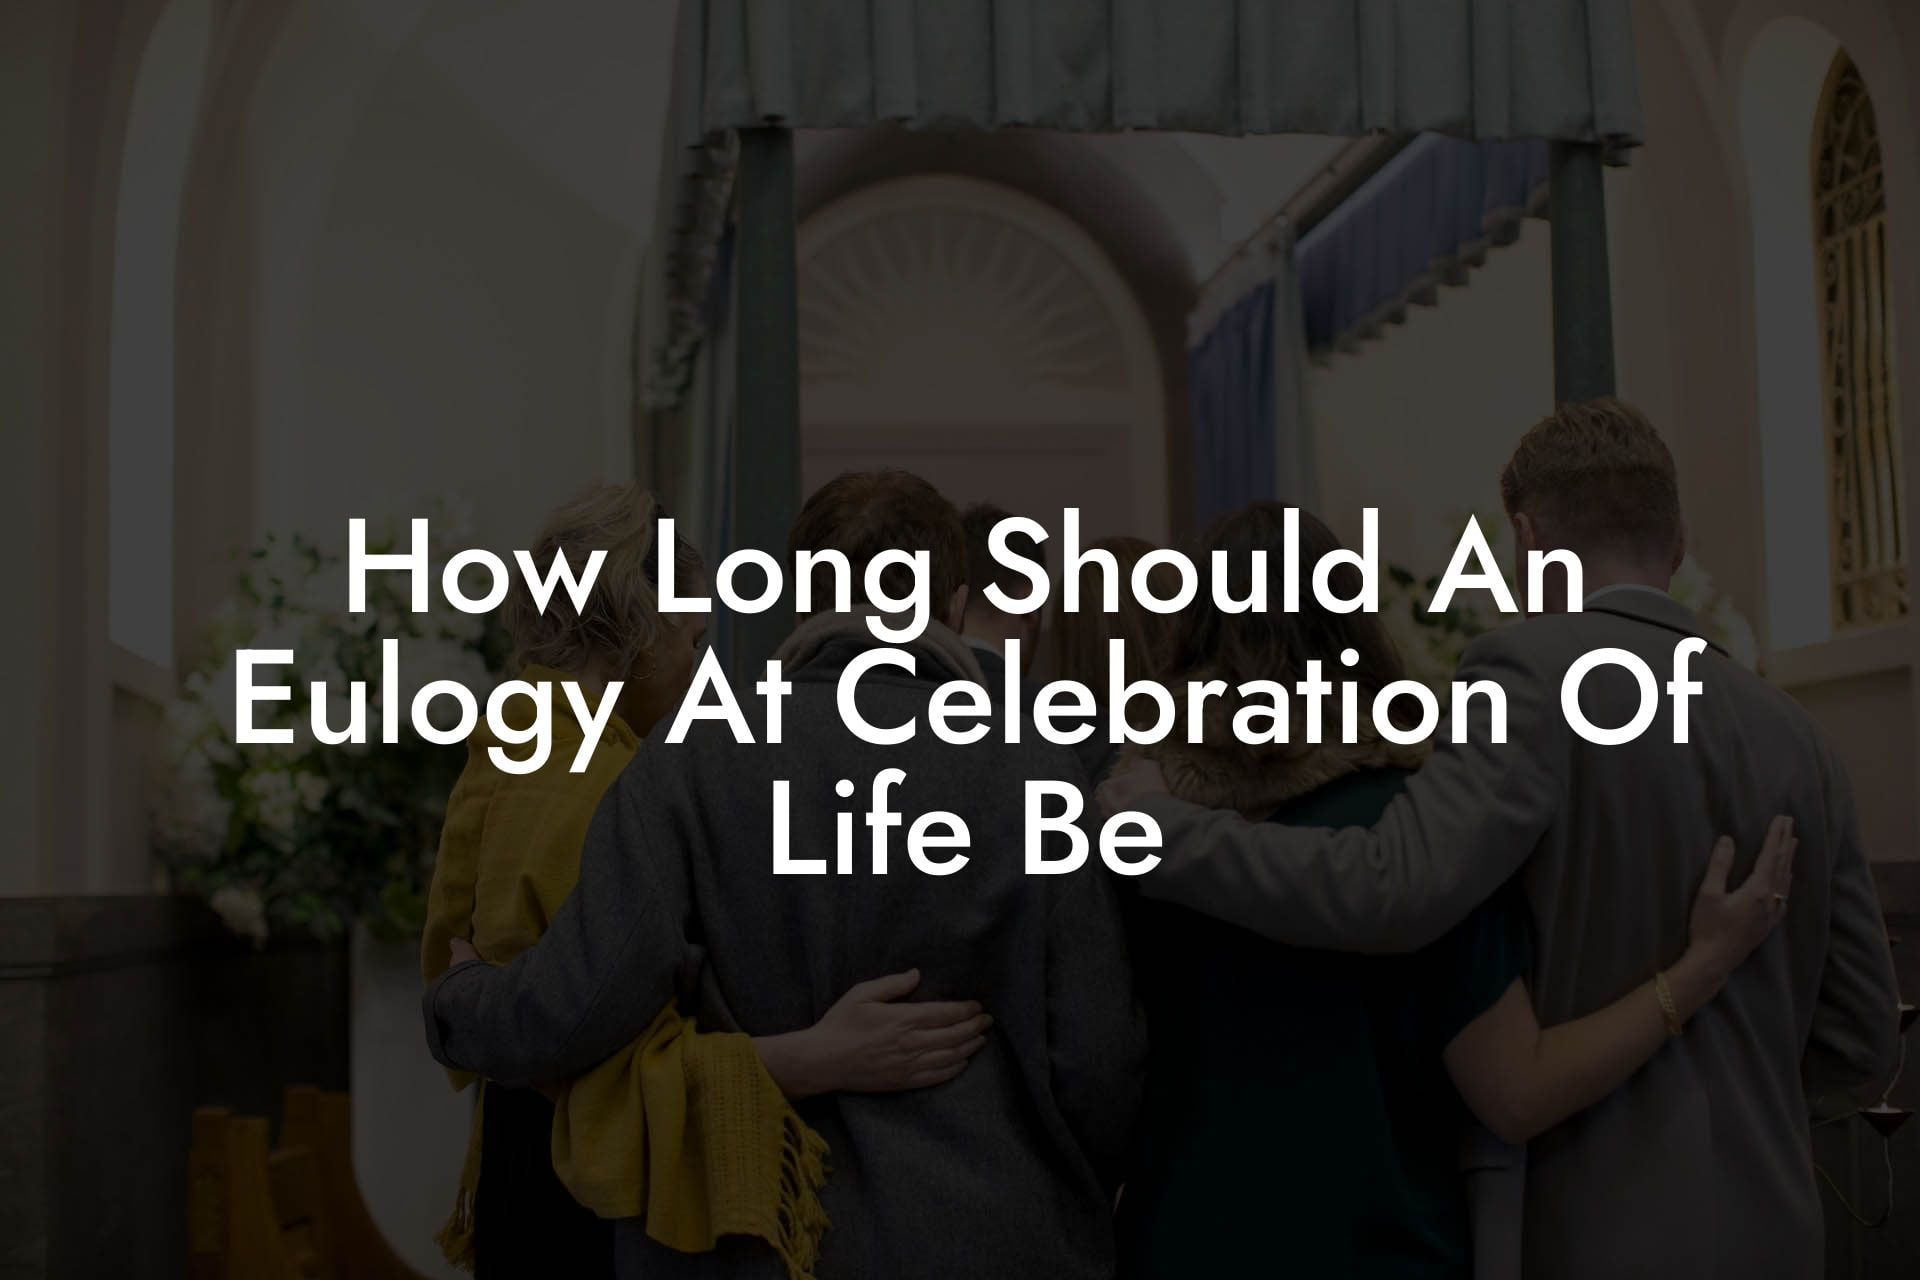 How Long Should An Eulogy At Celebration Of Life Be